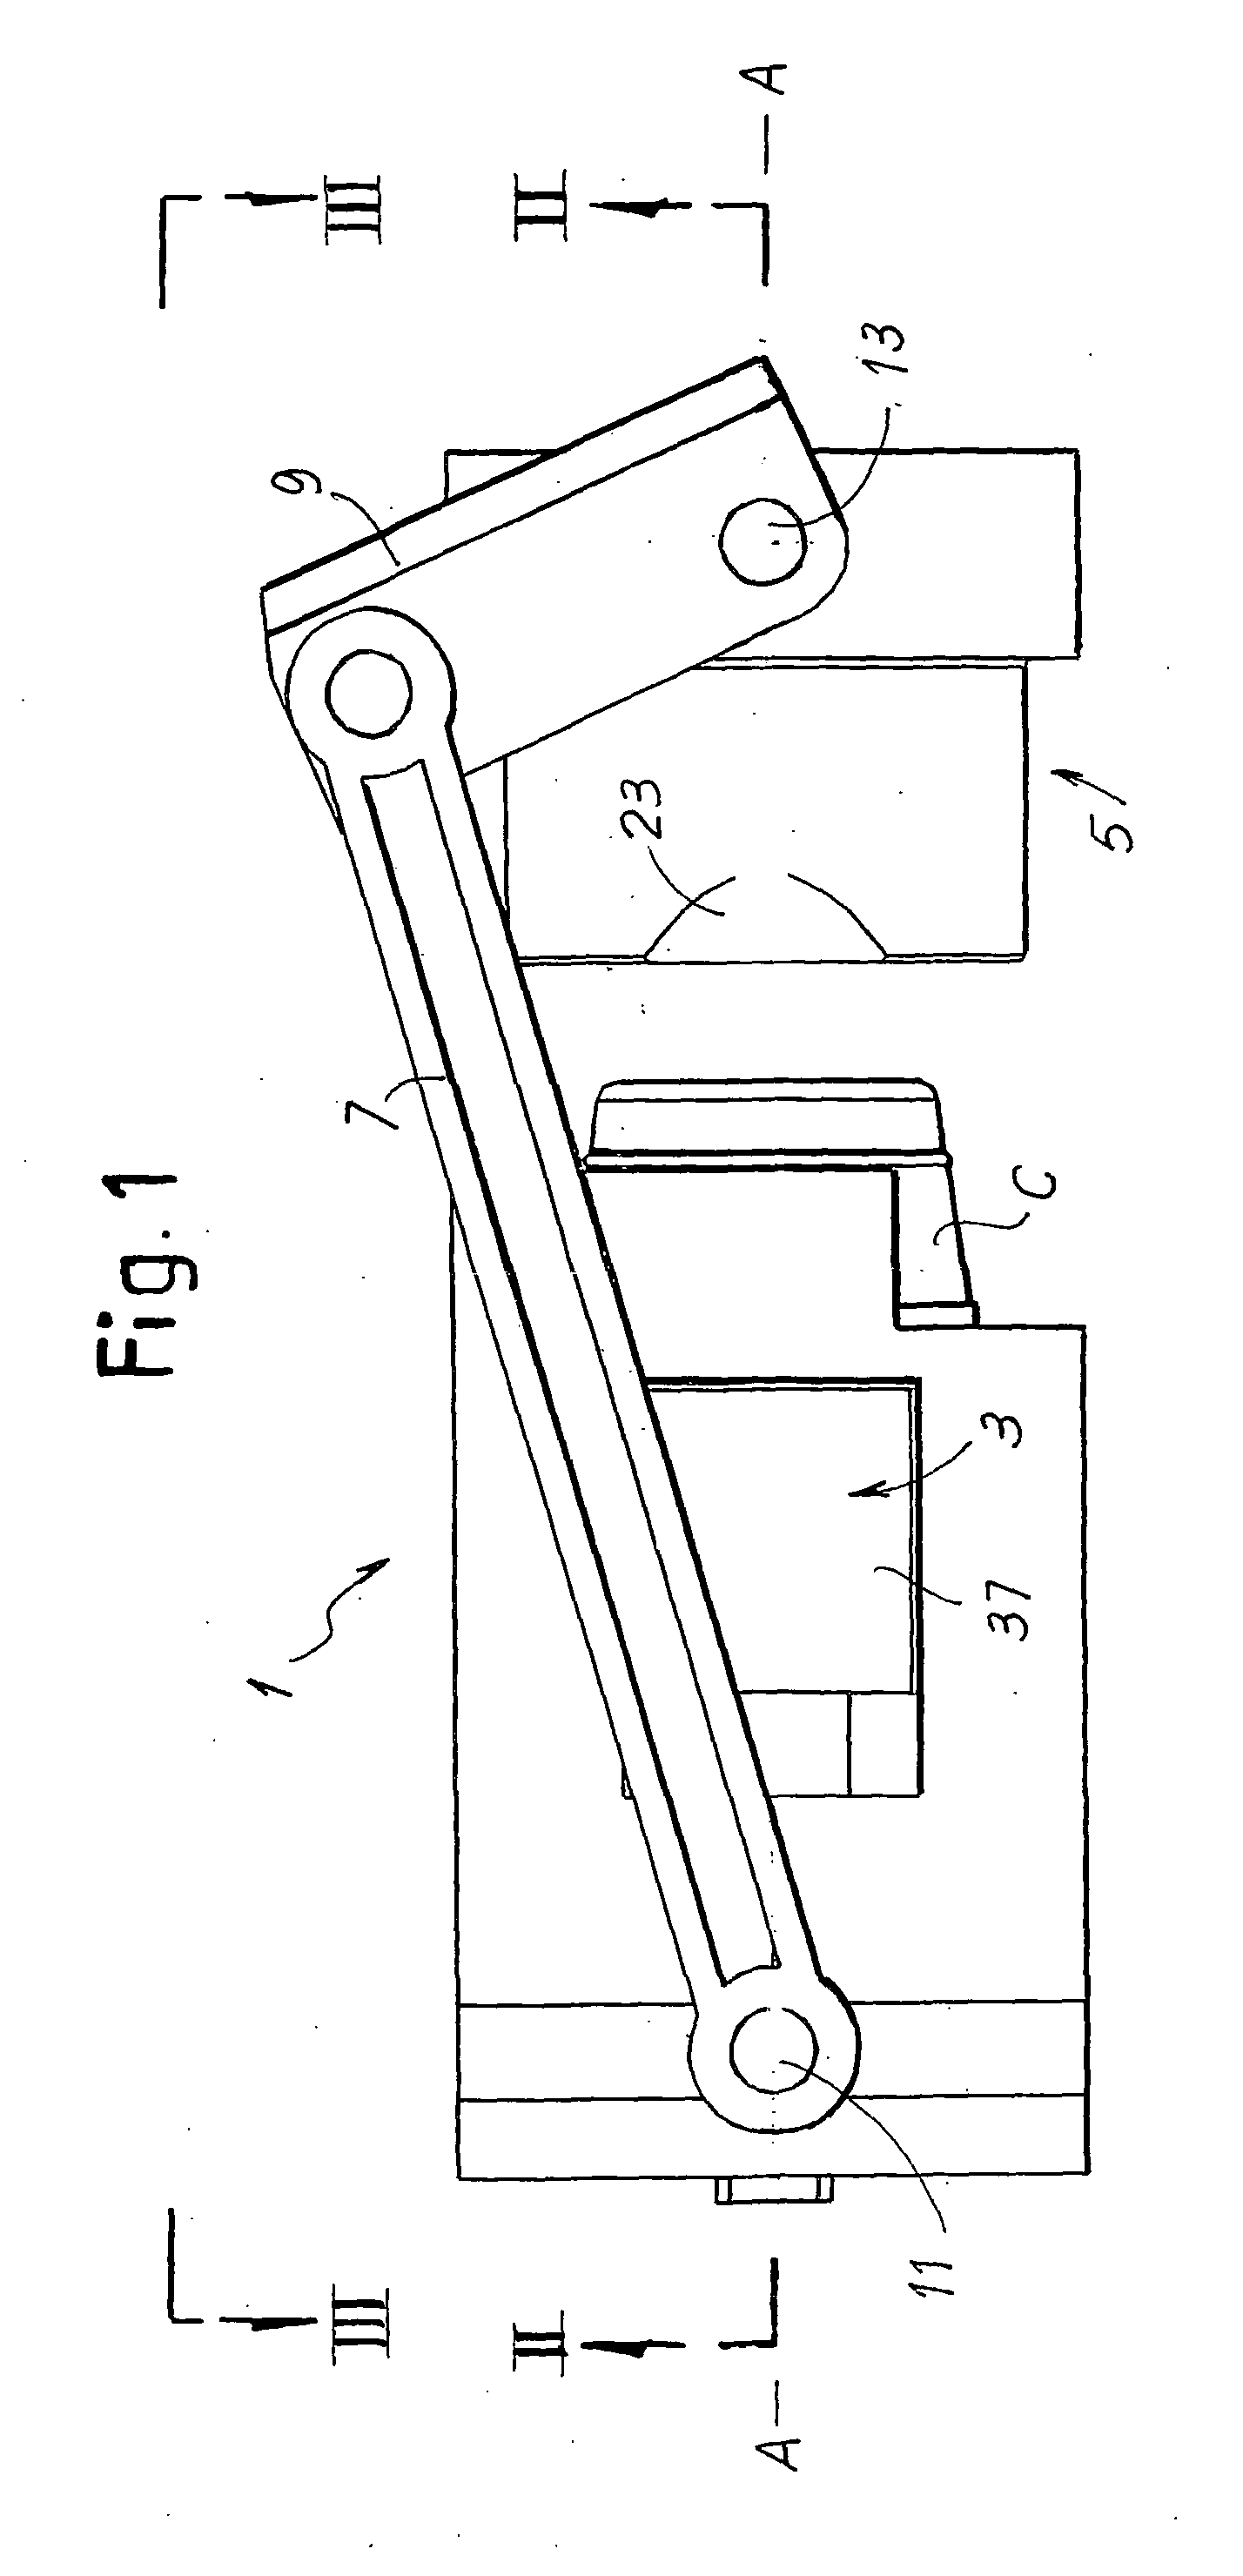 Infusion device for prepare beverages from single-serving capsules